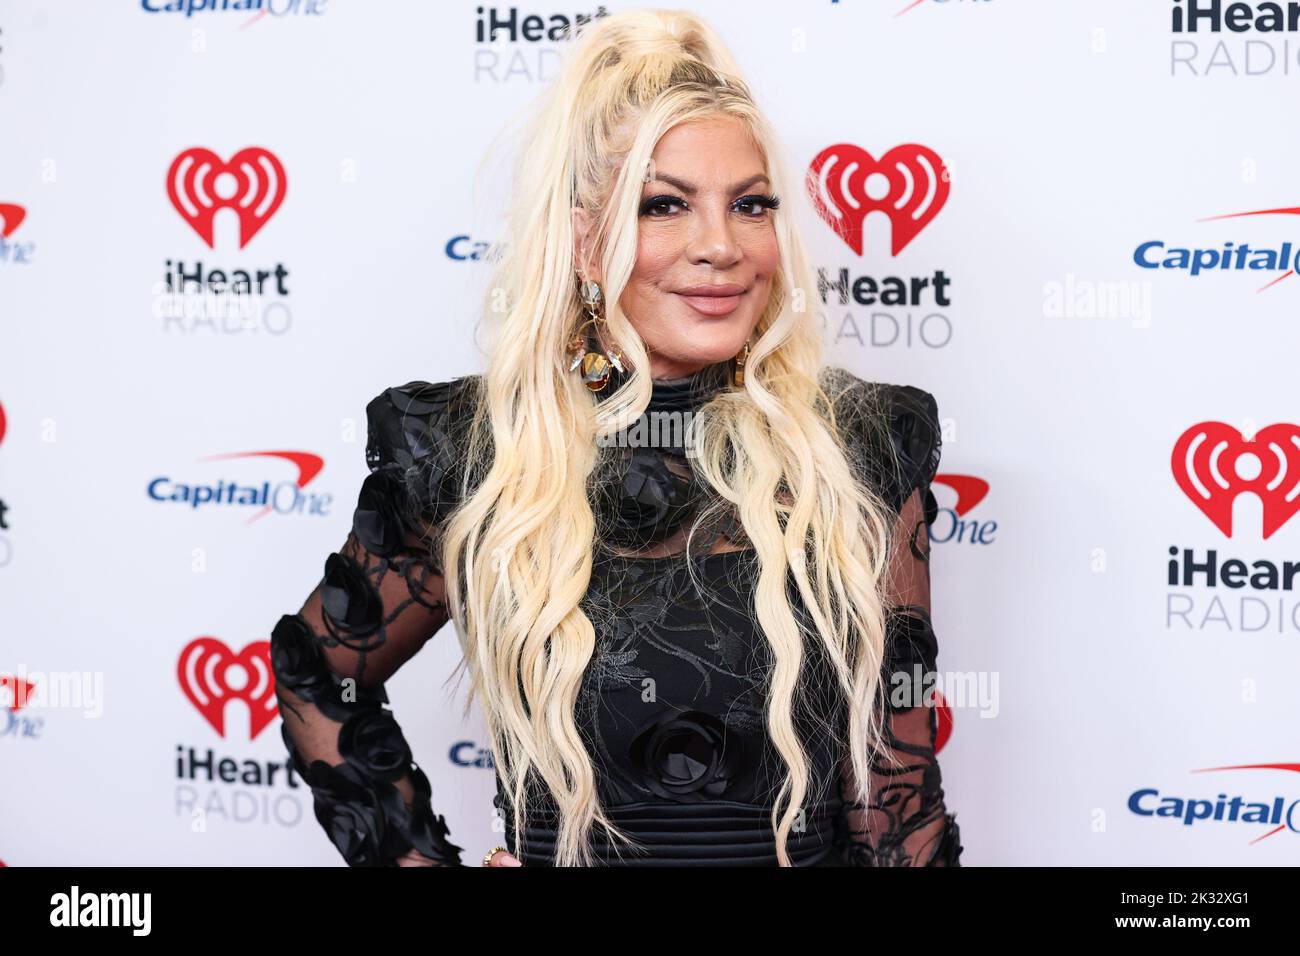 Las Vegas, United States. 23rd Sep, 2022. LAS VEGAS, NEVADA, USA - SEPTEMBER 23: Tori Spelling poses in the press room at the 2022 iHeartRadio Music Festival - Night 1 held at the T-Mobile Arena on September 23, 2022 in Las Vegas, Nevada, United States. (Photo by Xavier Collin/Image Press Agency) Credit: Image Press Agency/Alamy Live News Stock Photo